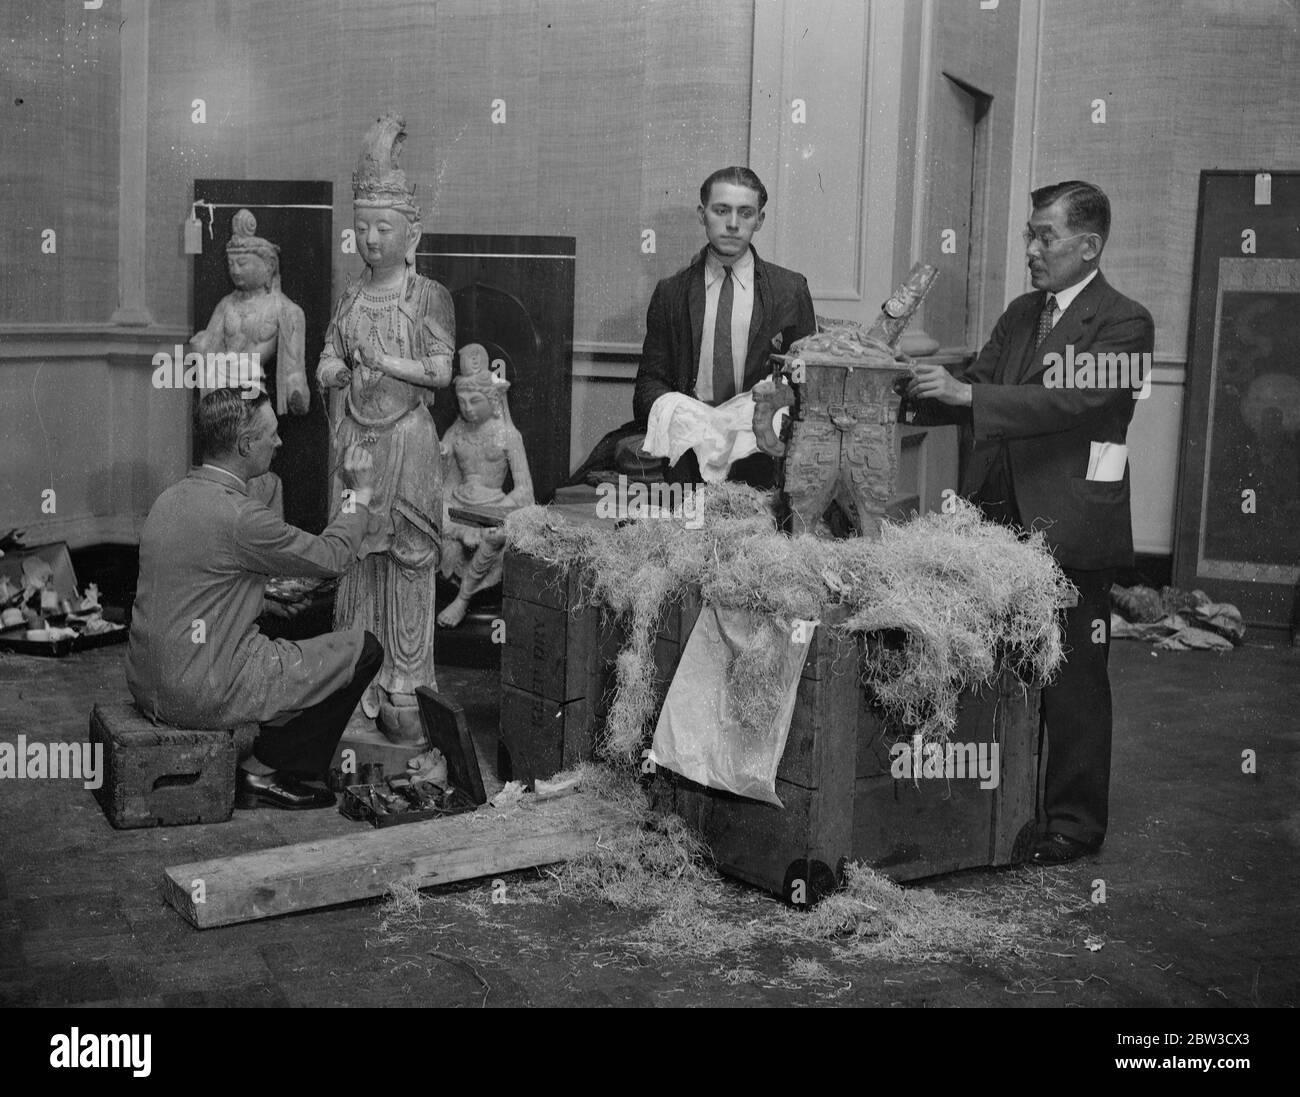 Emperor of Japan 's Chinese art treasures being unpacked in London for exhibition . Mr Somoji Okada , Commissioner for Chinese exhibits from Japan , superintending the unpacking of the pieces at Burlington House . 1 November 1935 Stock Photo